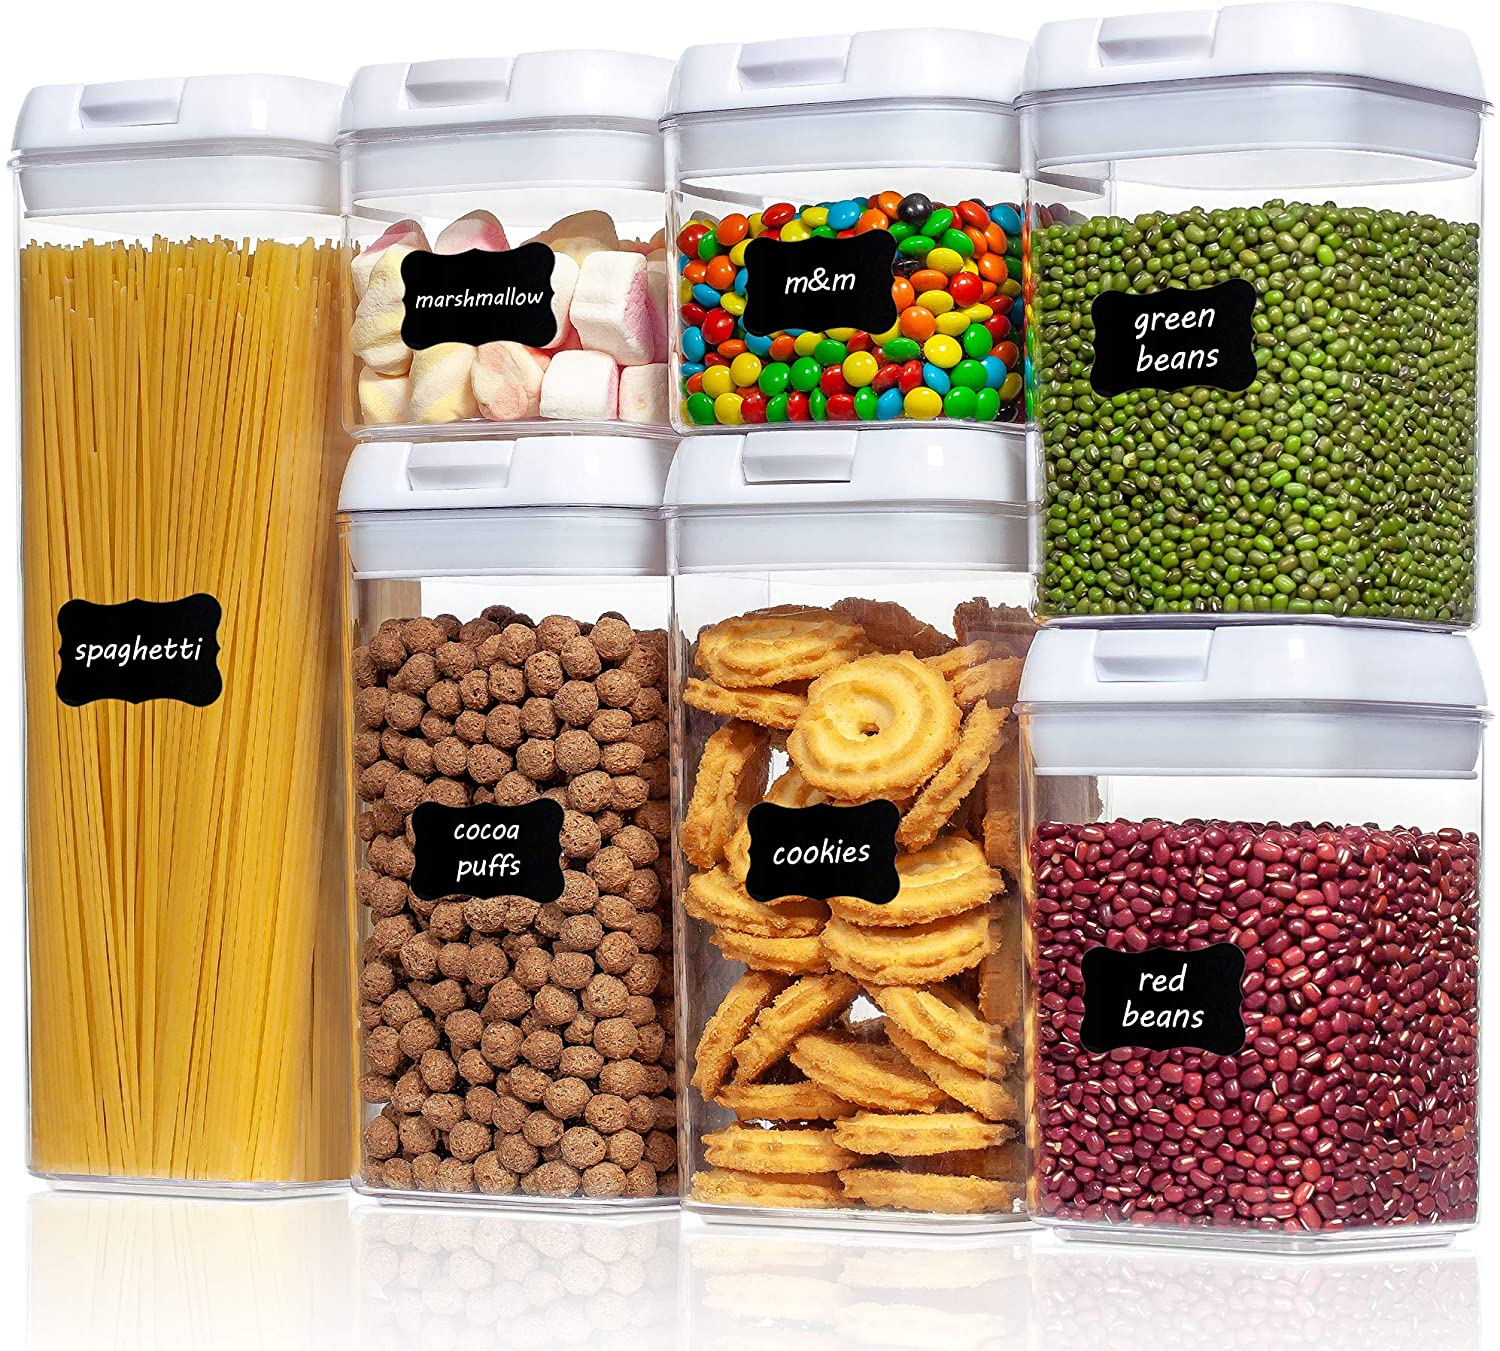 Plastic Food Container Storage Ideas : 4 Easy Ways To Organise Your ...